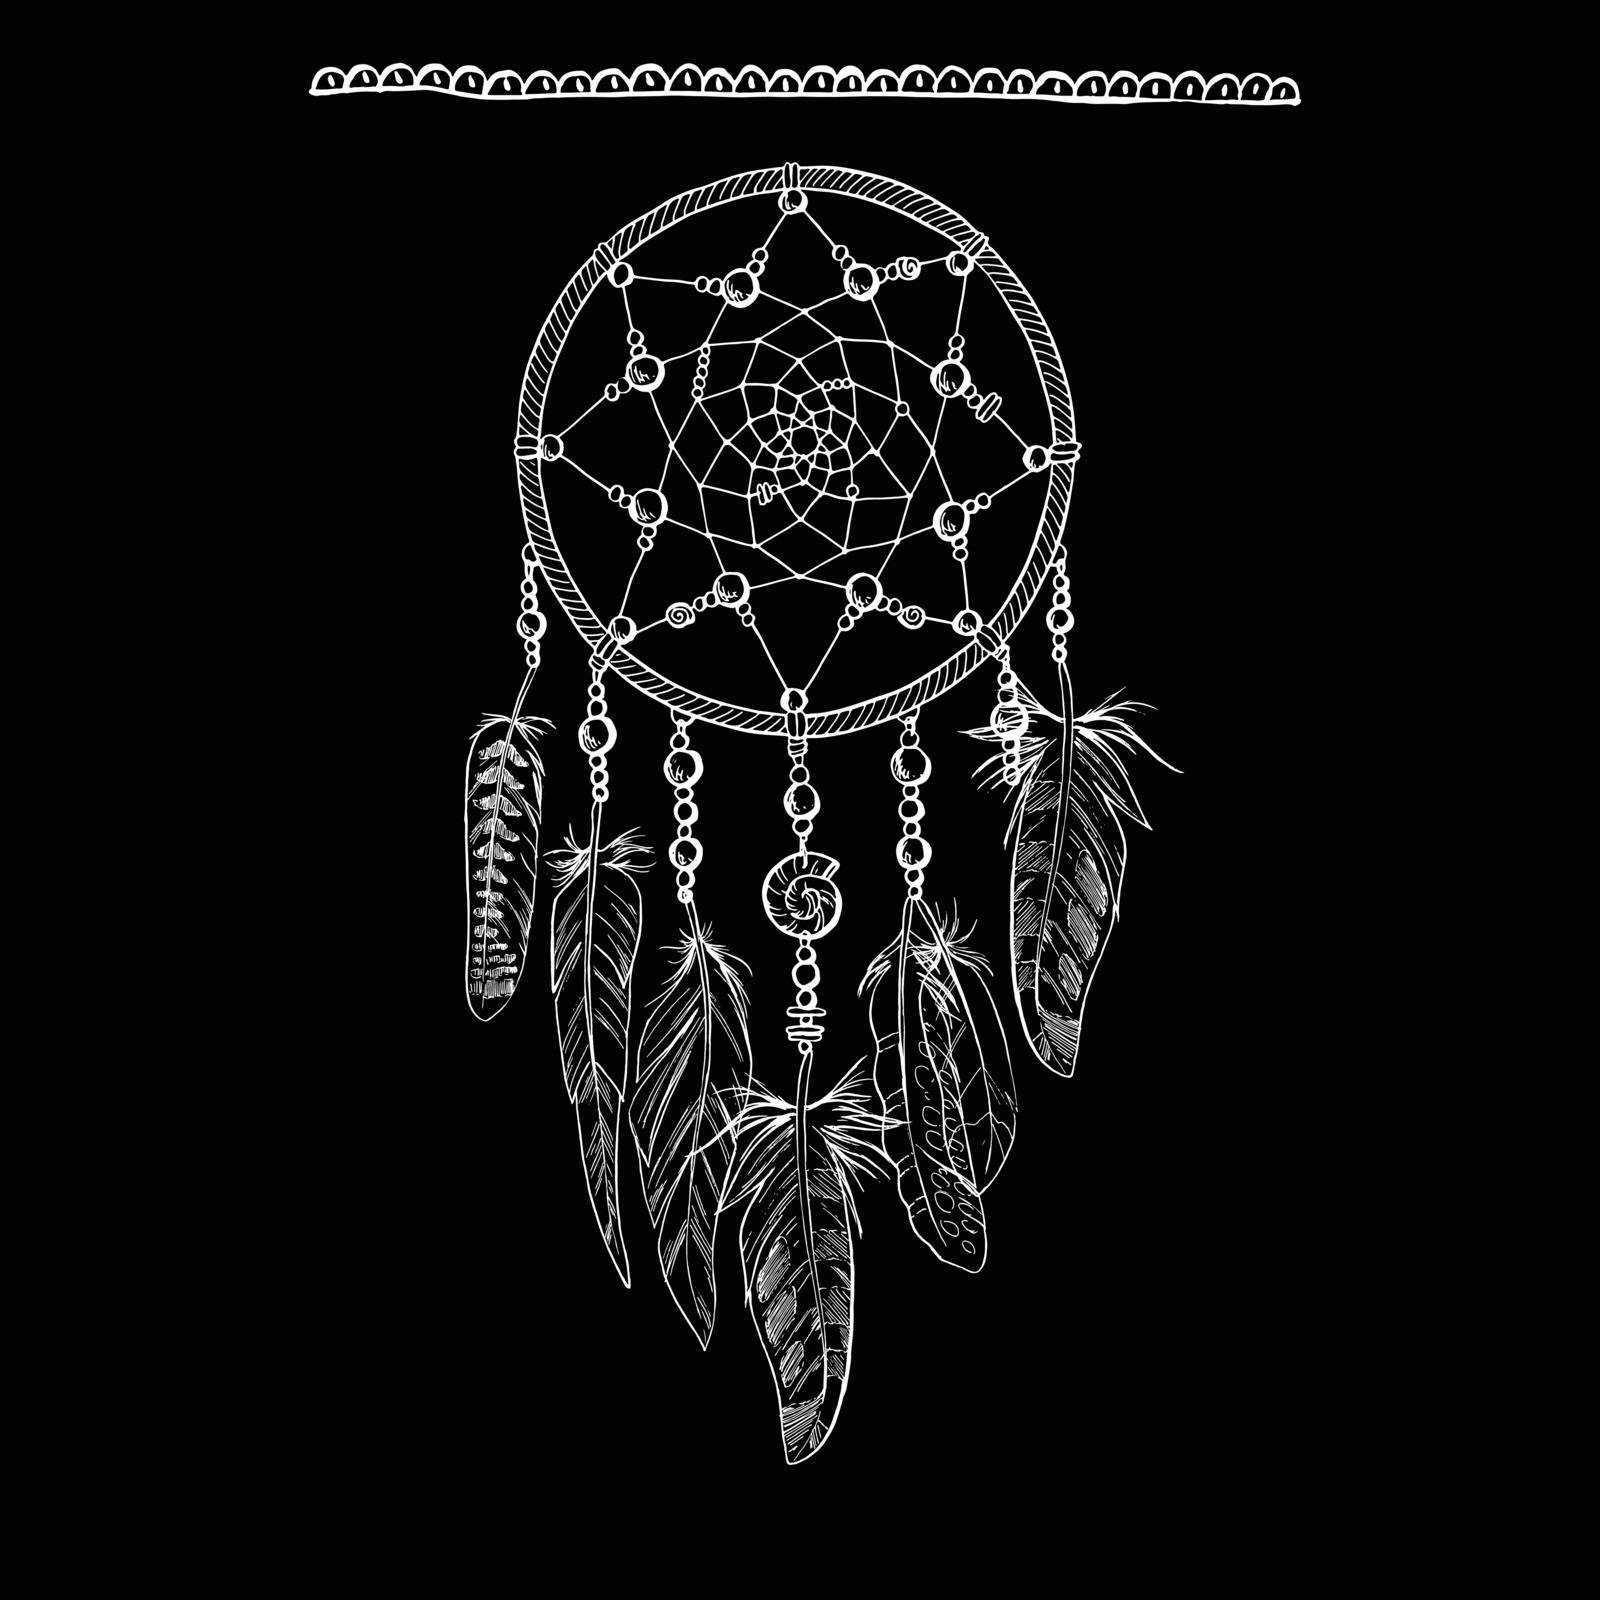 Hand drawn ornate Dreamcatcher with feathers, gemstones. Astrology, spirituality, magic symbol. Ethnic tribal element. by nutela_pancake